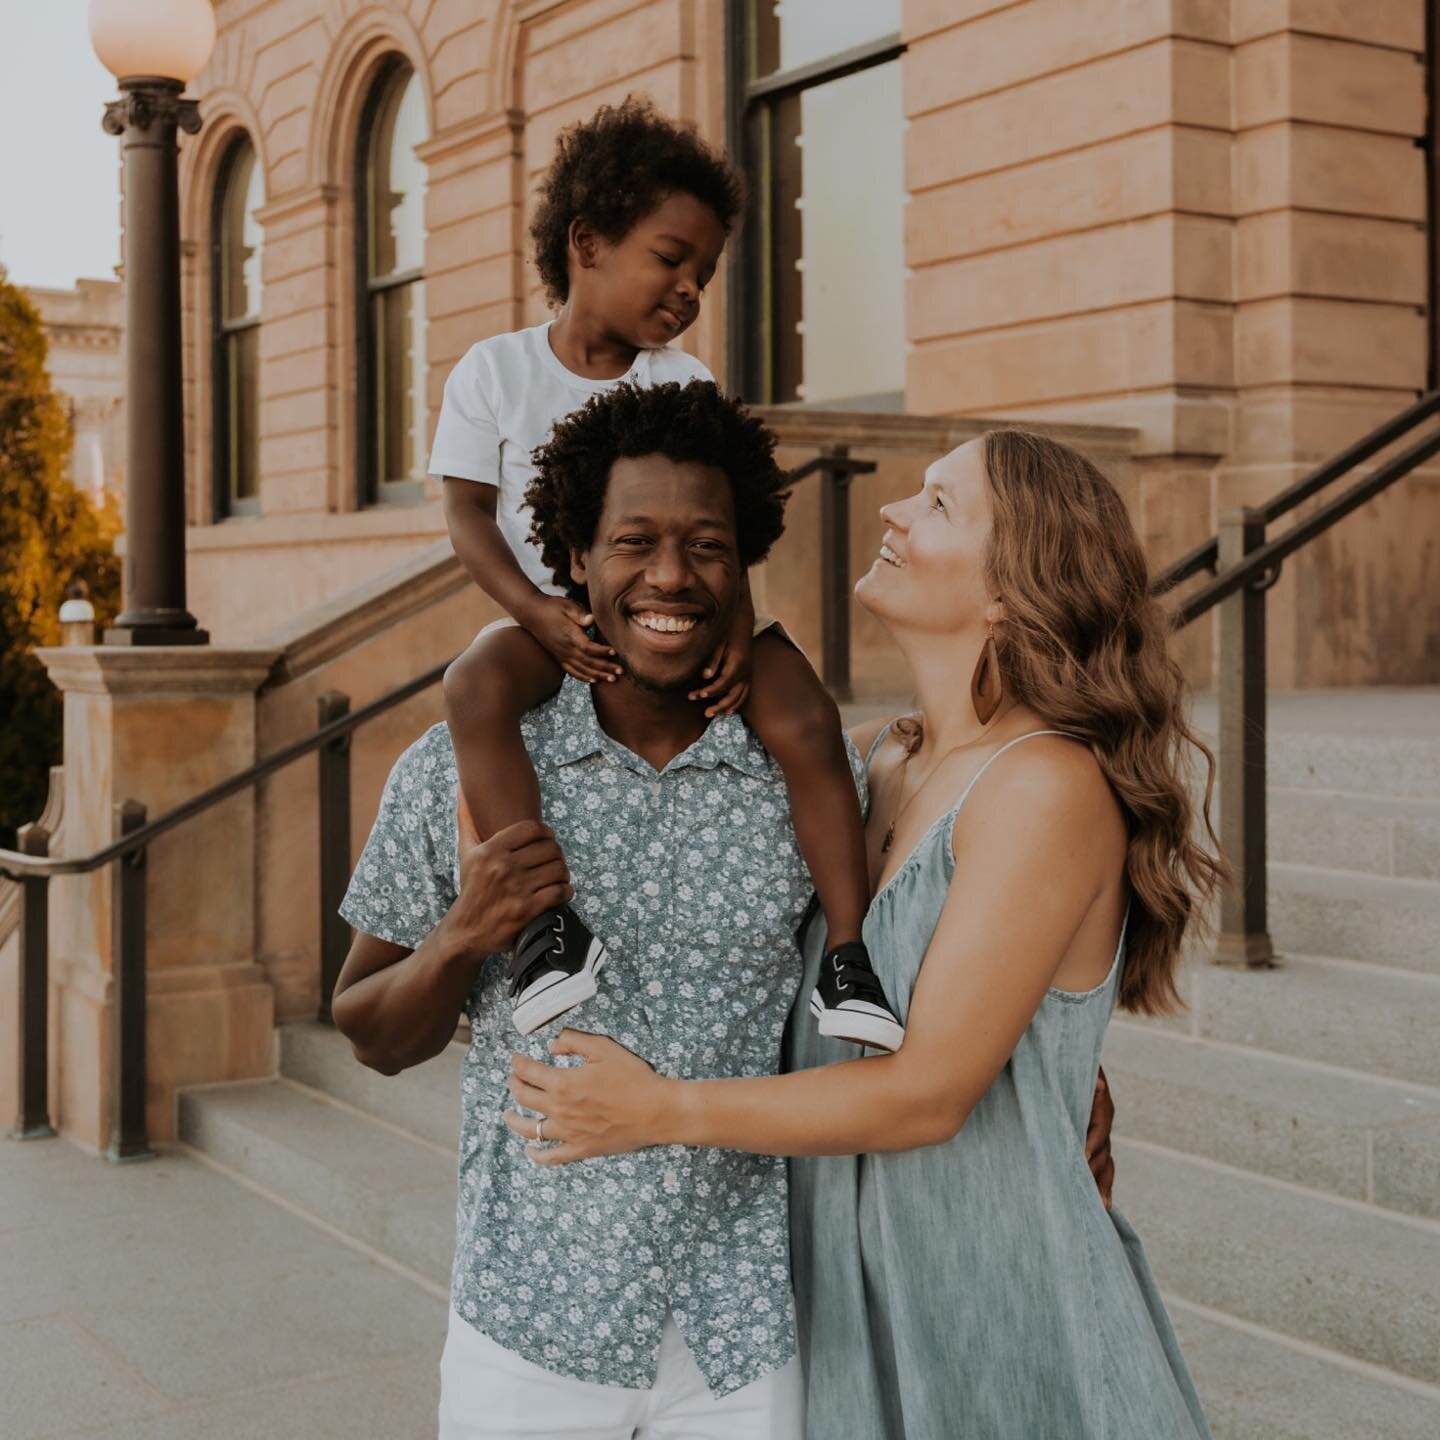 Downtown family sessions have been the vibe lately 🤩 This sweet sweet fam is always a joy 🤍